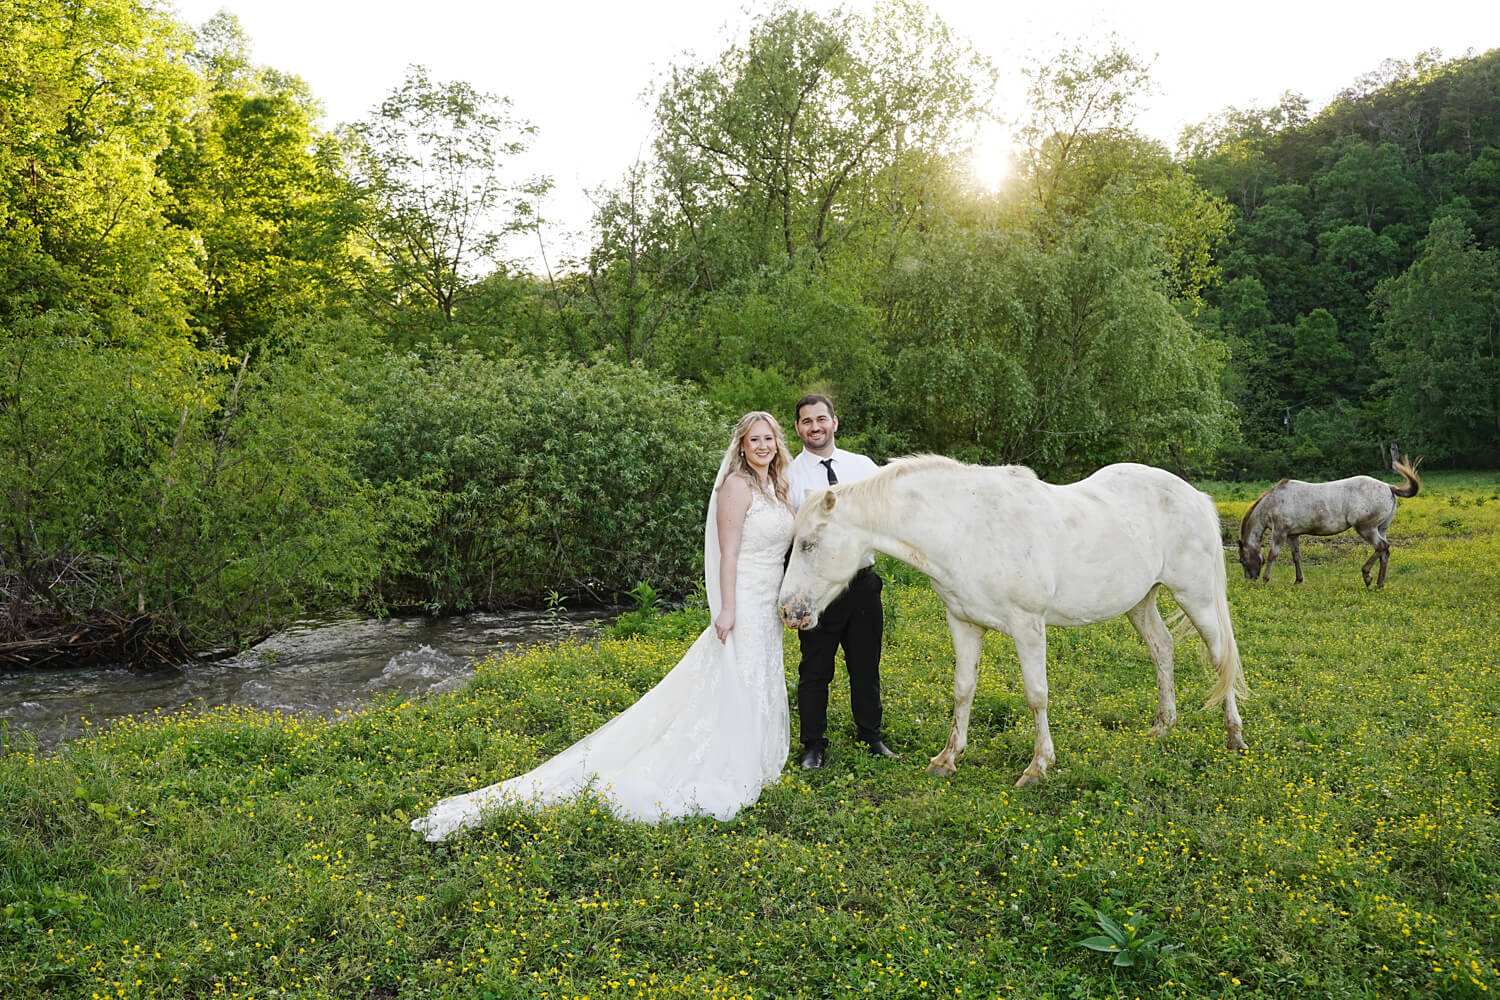 bride and groom petting a white appaloosa horse in a field by a creek as the sun goes down behind the trees